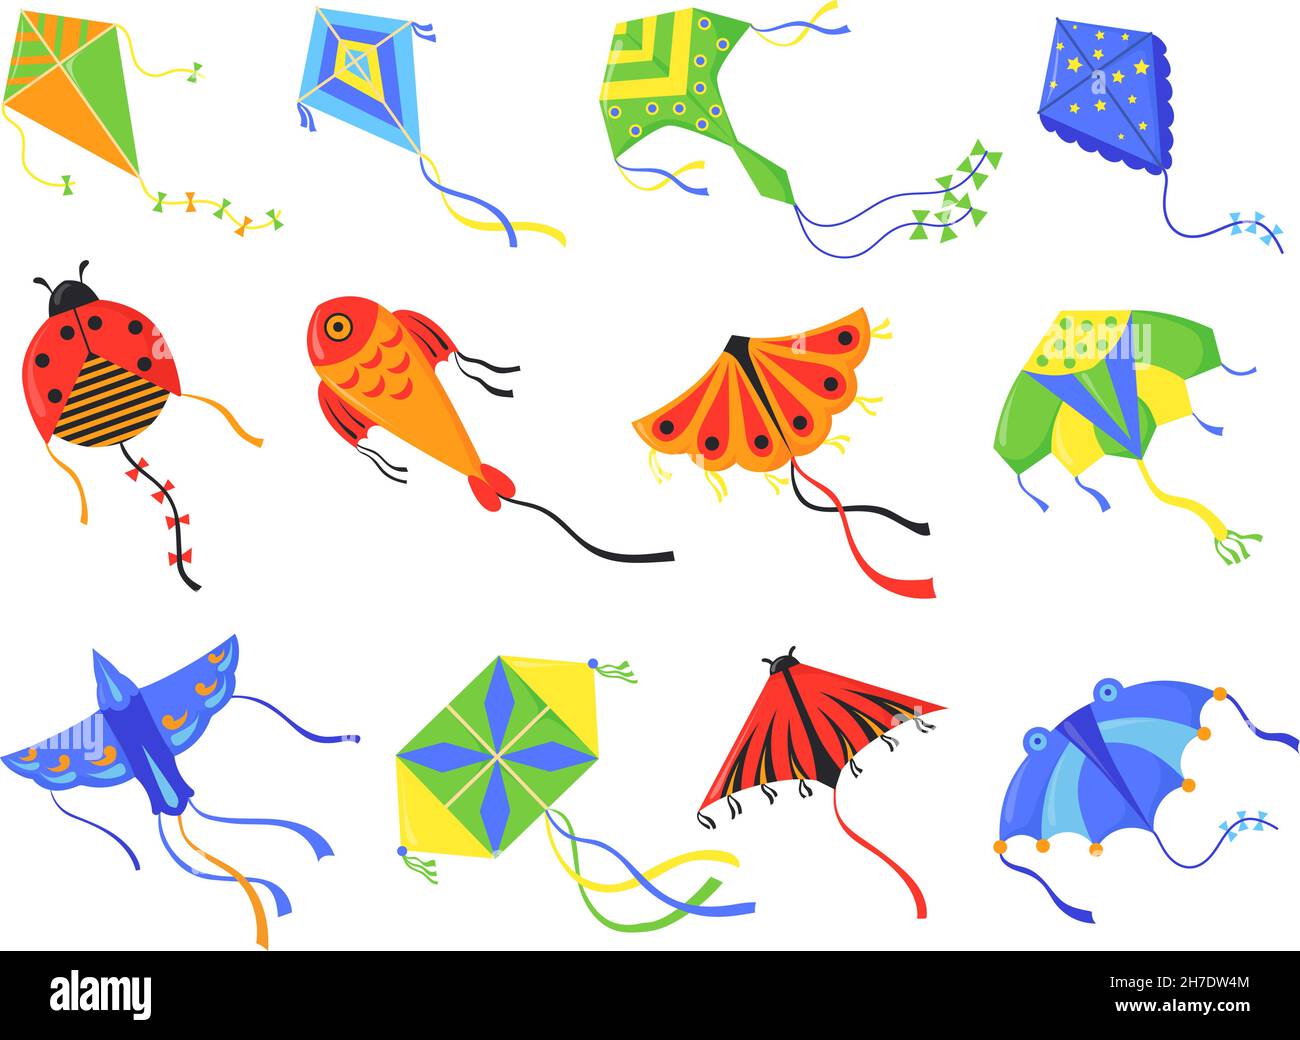 Flying kites. Cartoon colorful festive toys for kids, animals and different types geometric shapes waving in wind, game in sky for summer concepts neat vector illustration. Festival kite entertainment Stock Vector